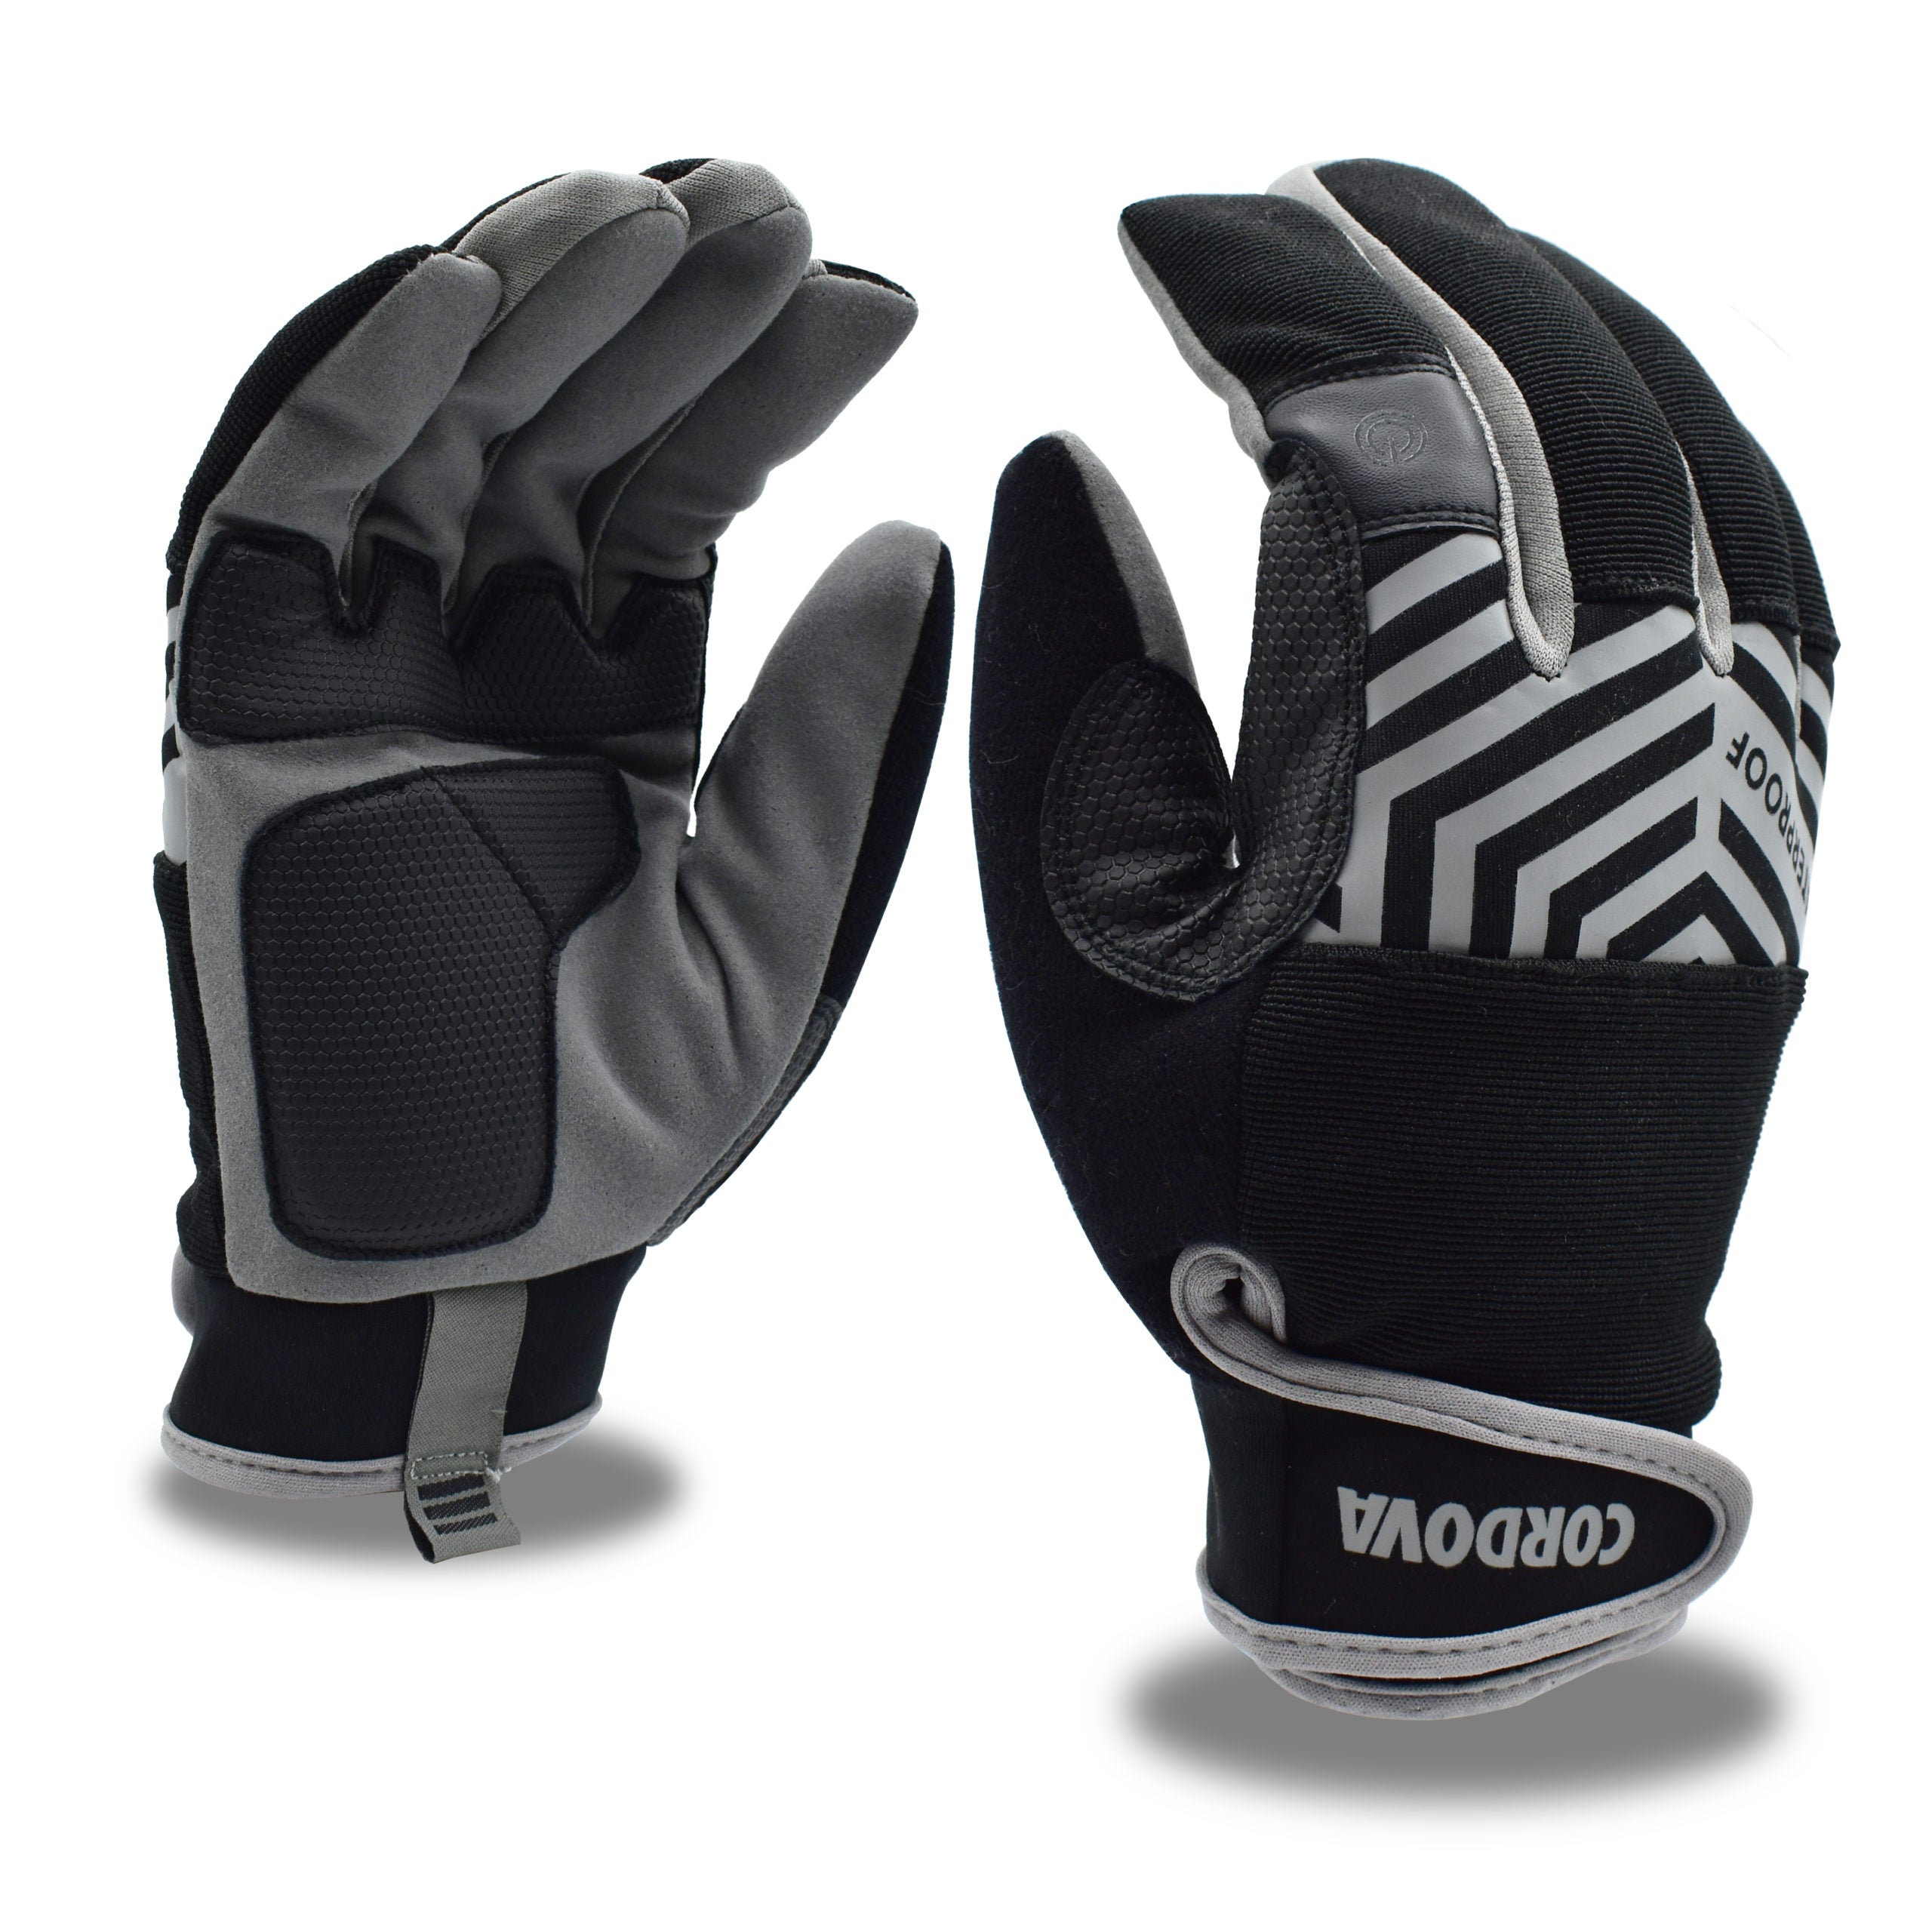 Cordova 99961 Gloves, Synthetic Leather Palm, Padded Palm Reinforcements, Waterproof Insert, Touchscreen Knuckle, Hook & Loop Closure, Large